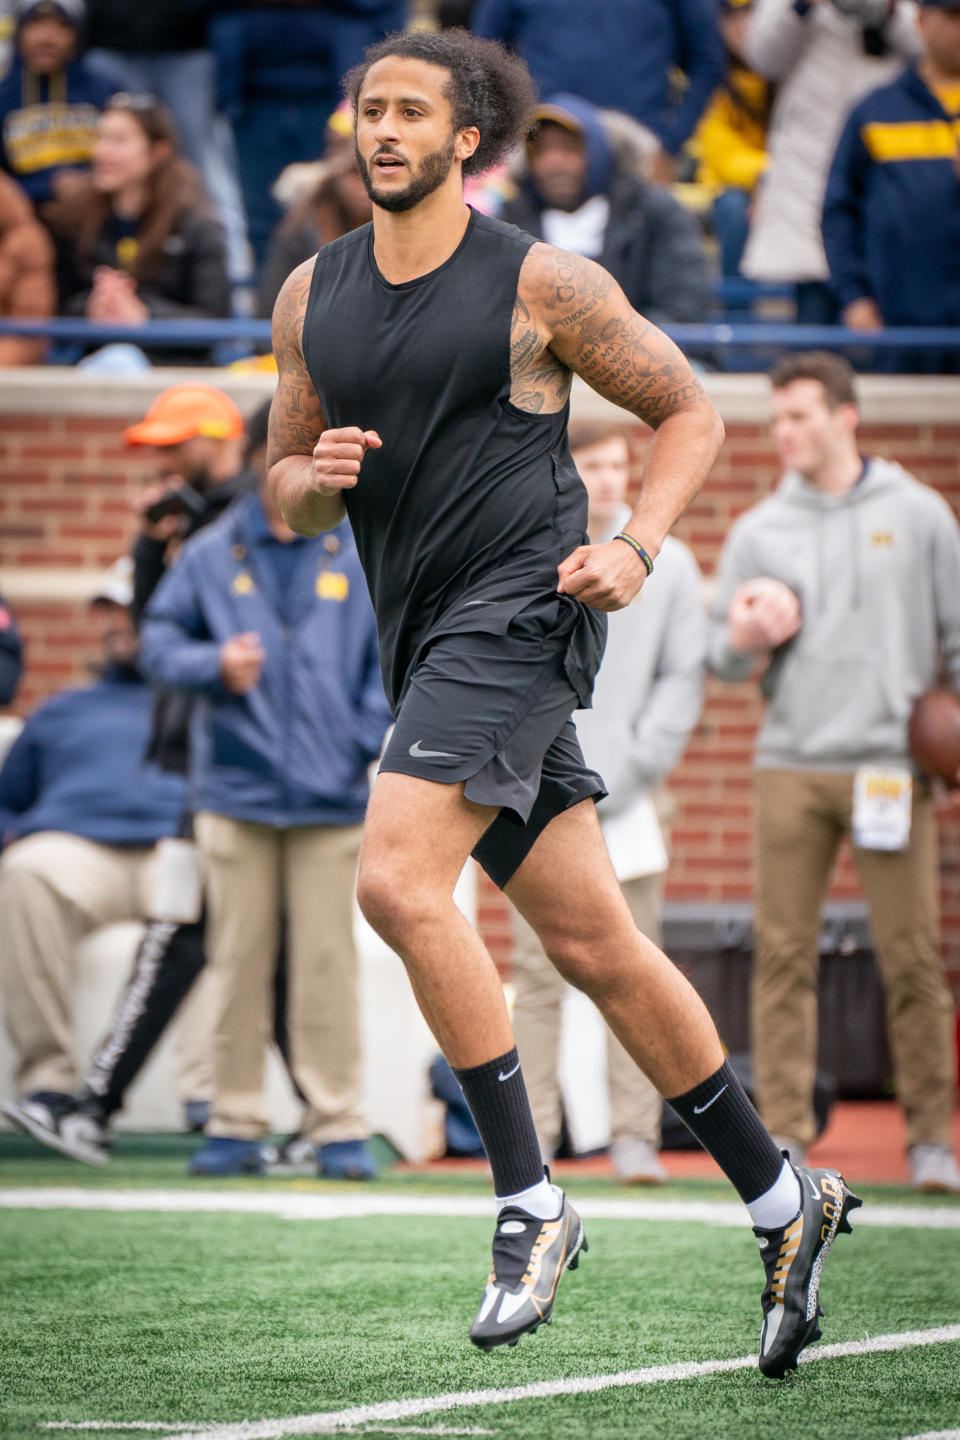 Colin Kaepernick participates in a throwing exhibition during halftime of the Michigan spring football game at Michigan Stadium on April 2, 2022 in Ann Arbor, Michigan. - Credit: Jaime Crawford/Getty Images